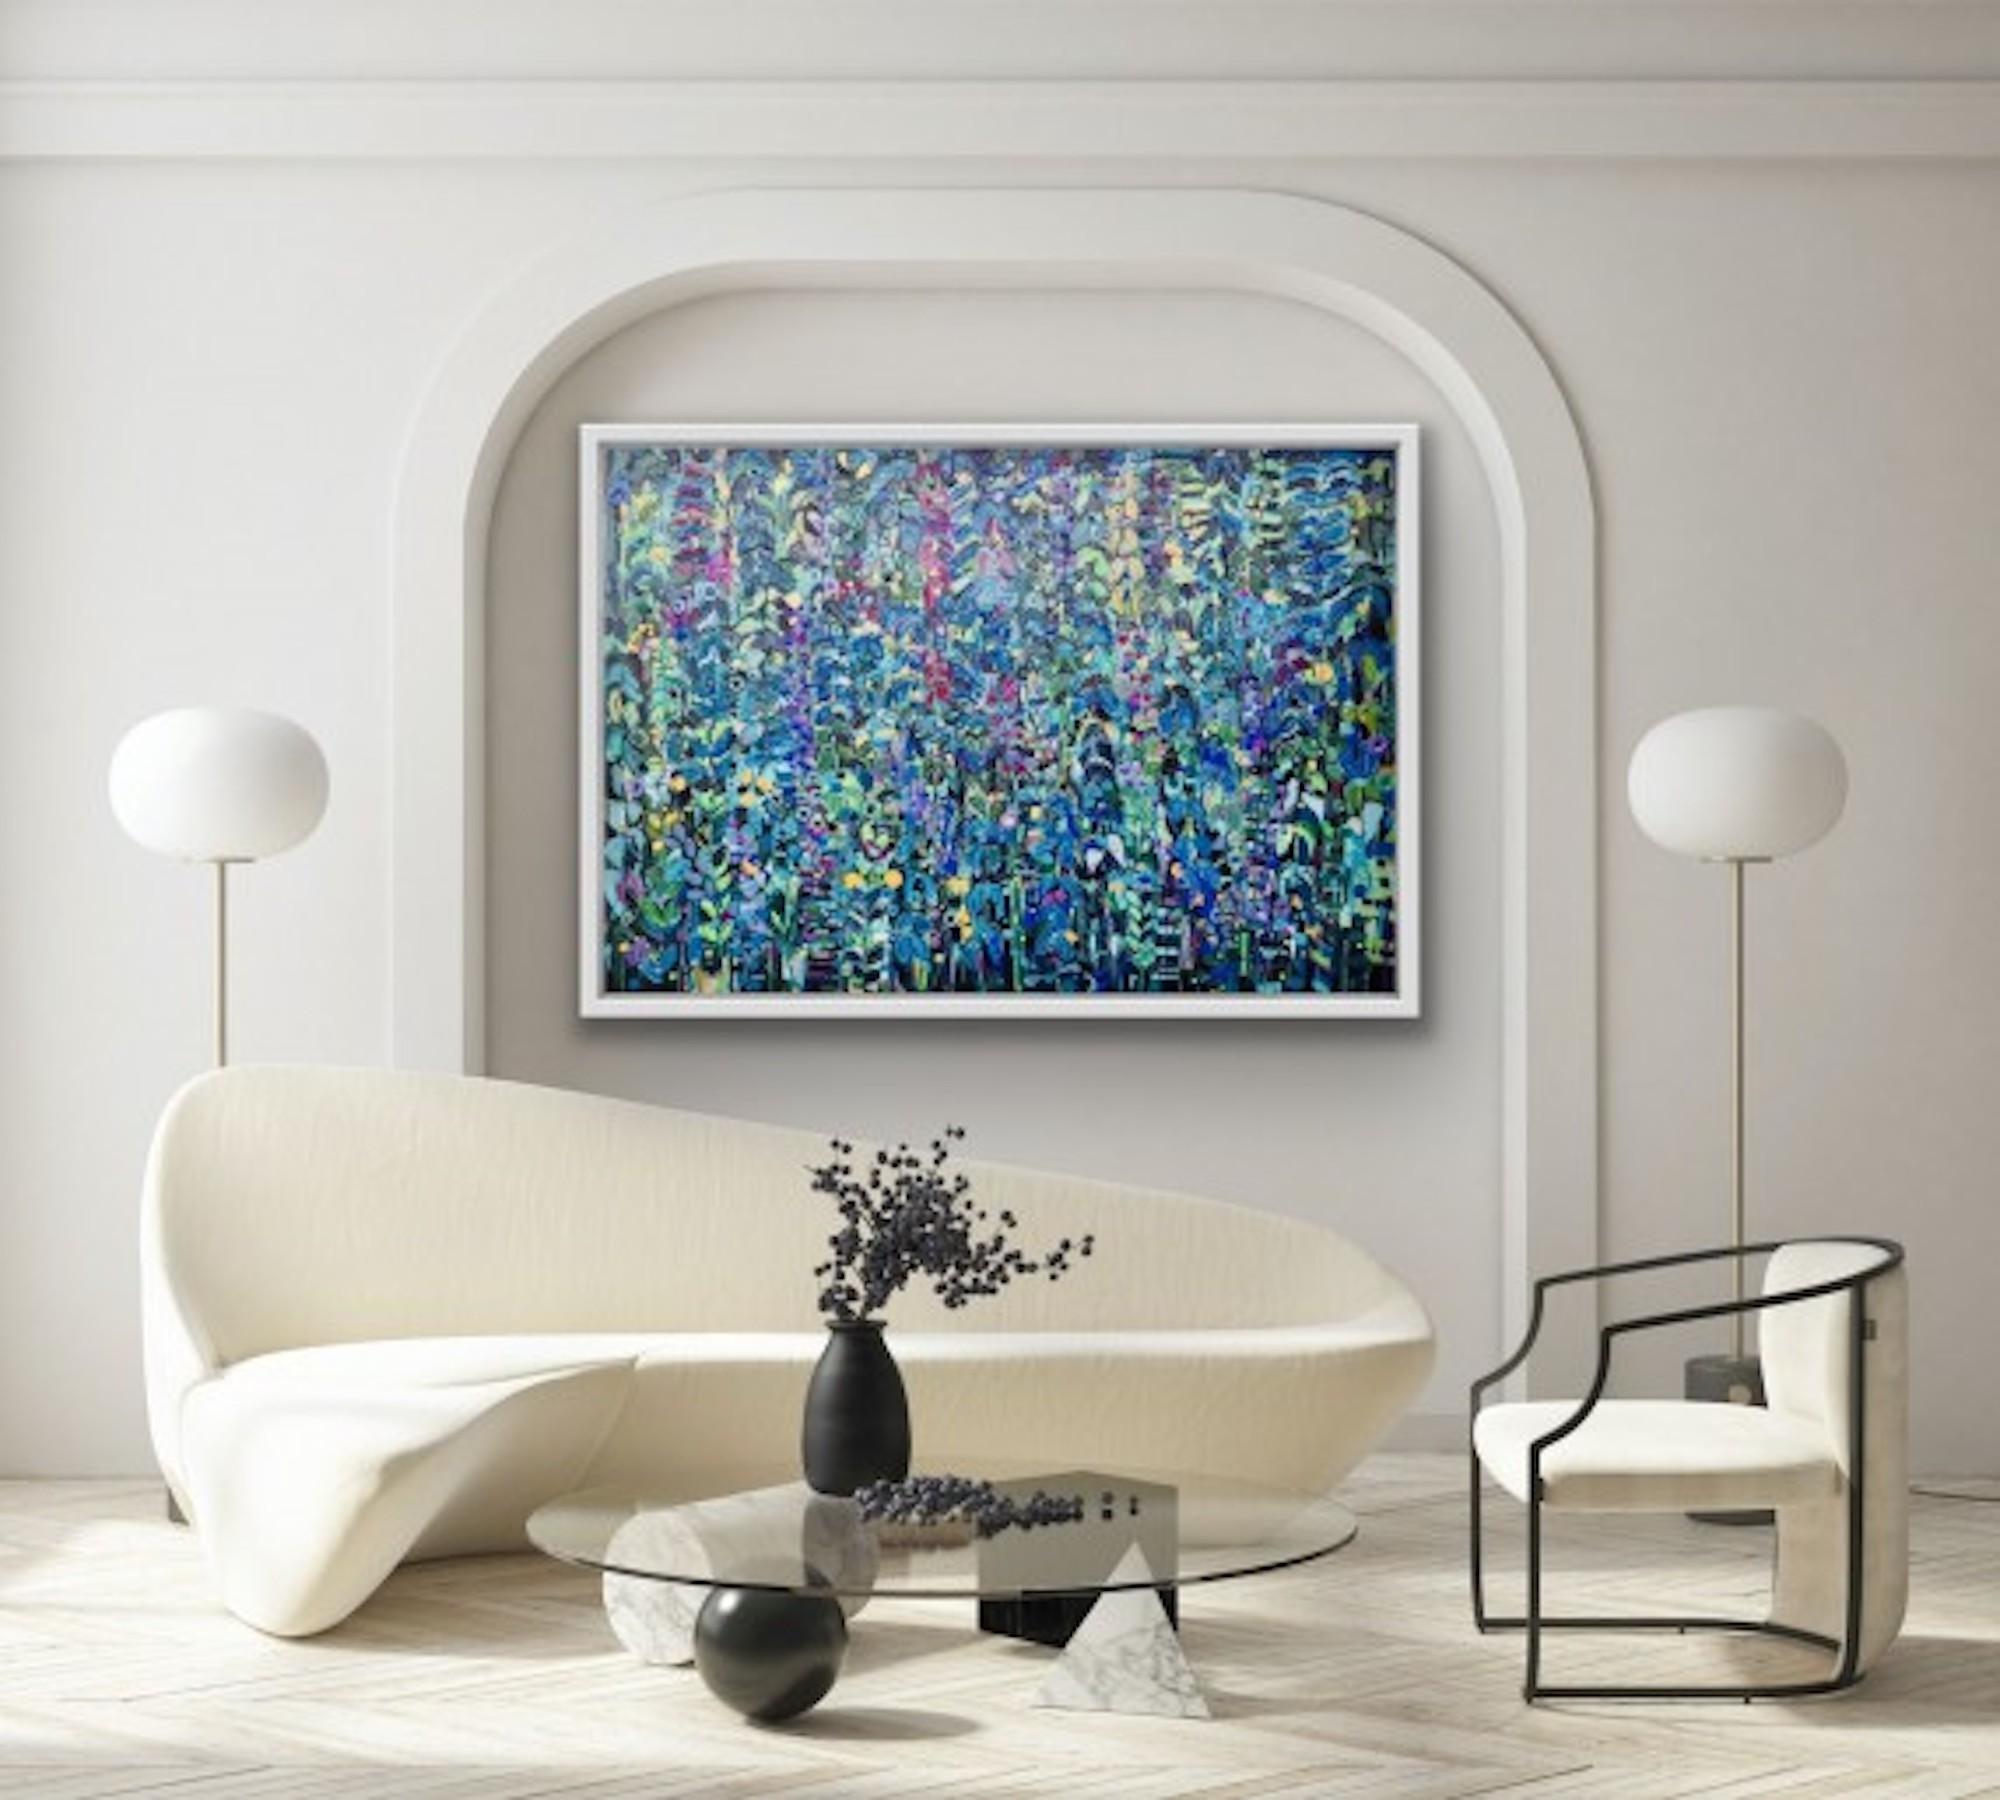 Purple & Blue Tangle, Vibrant Floral Painting, Artwork Inspired by Nature 4